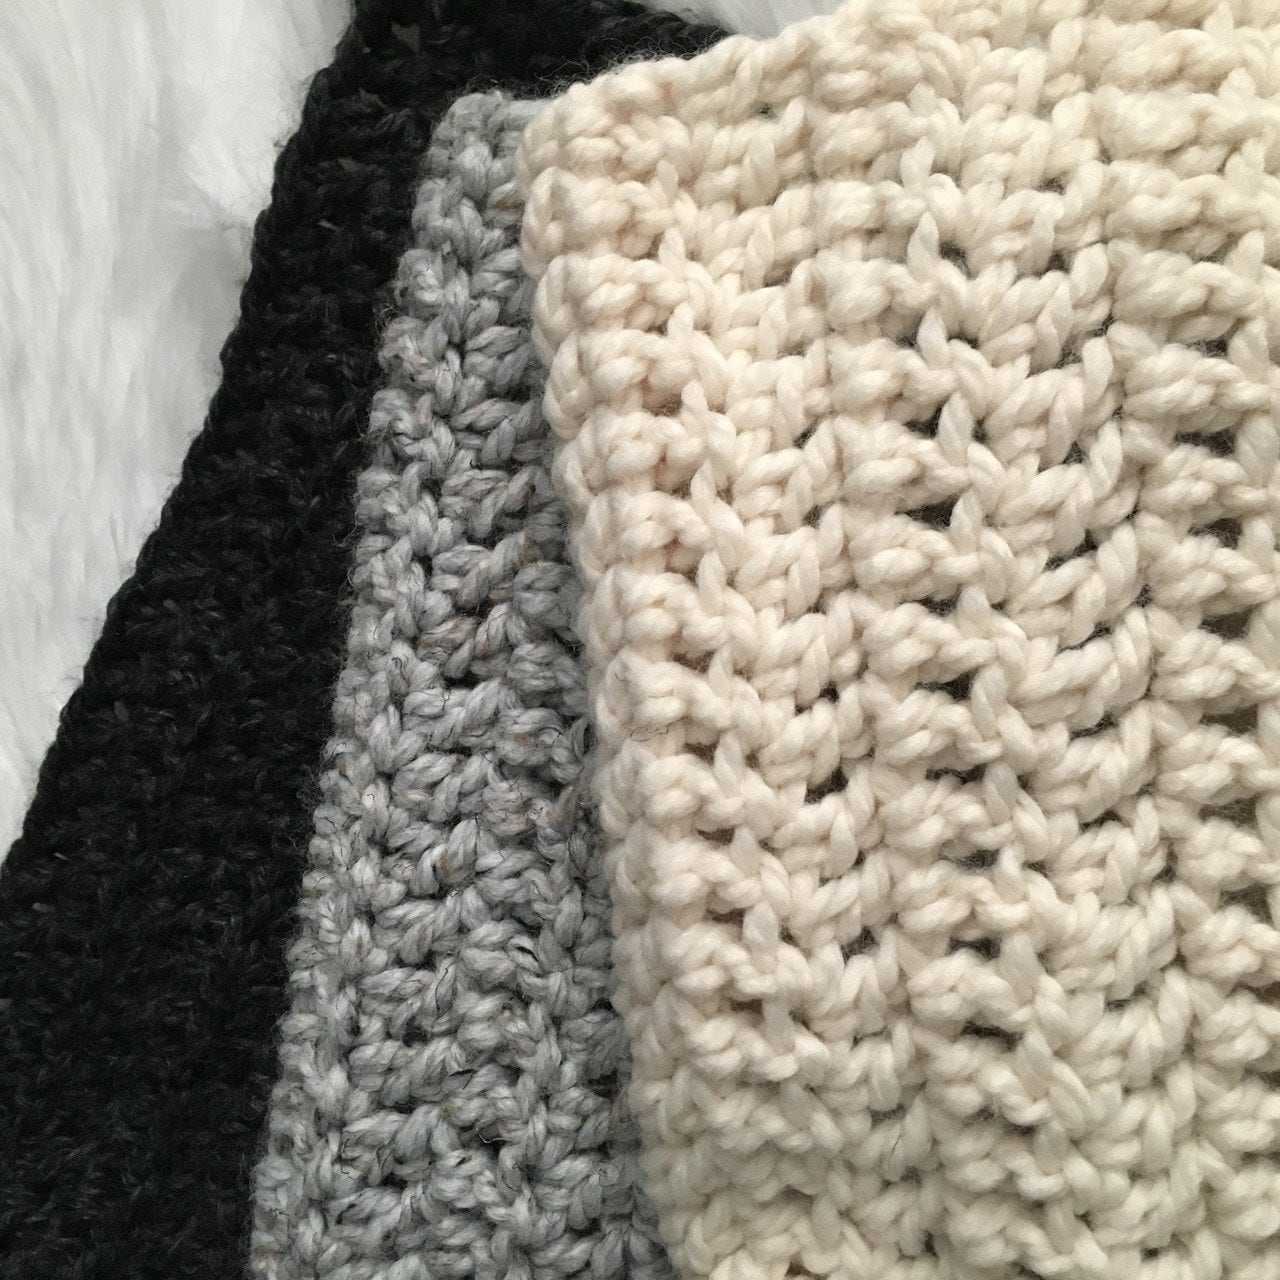 Crochet Blanket | Toddler Ombre | Ready to Ship Home decor 130 $ Buttons & Beans Co.